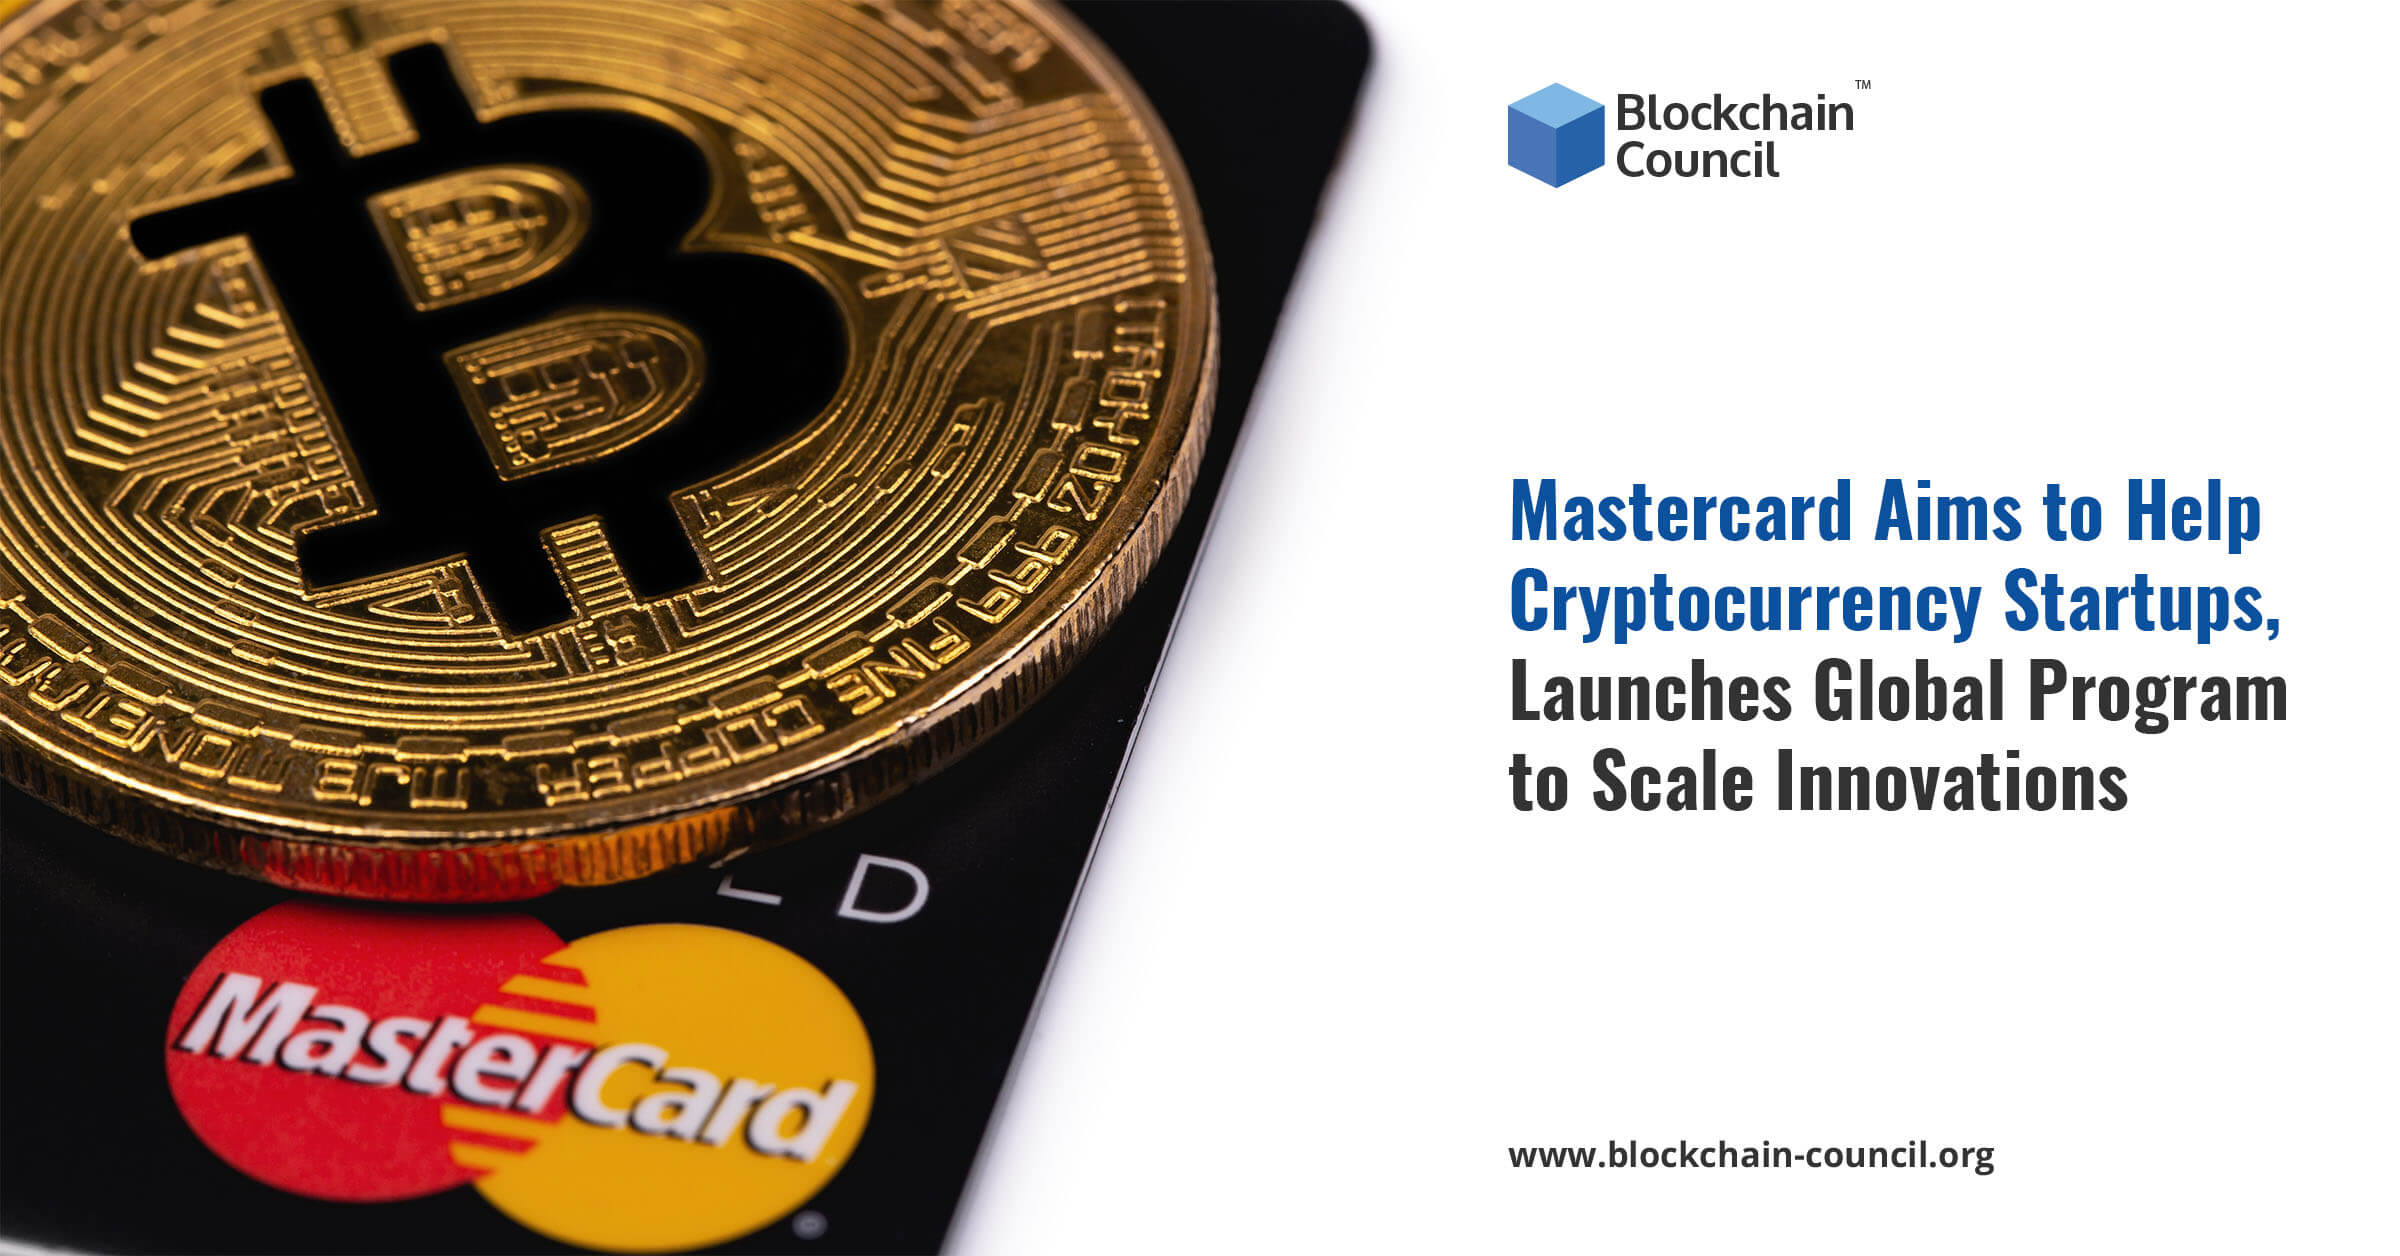 Mastercard Aims to Help Cryptocurrency Startups, Launches Global Program to Scale Innovations